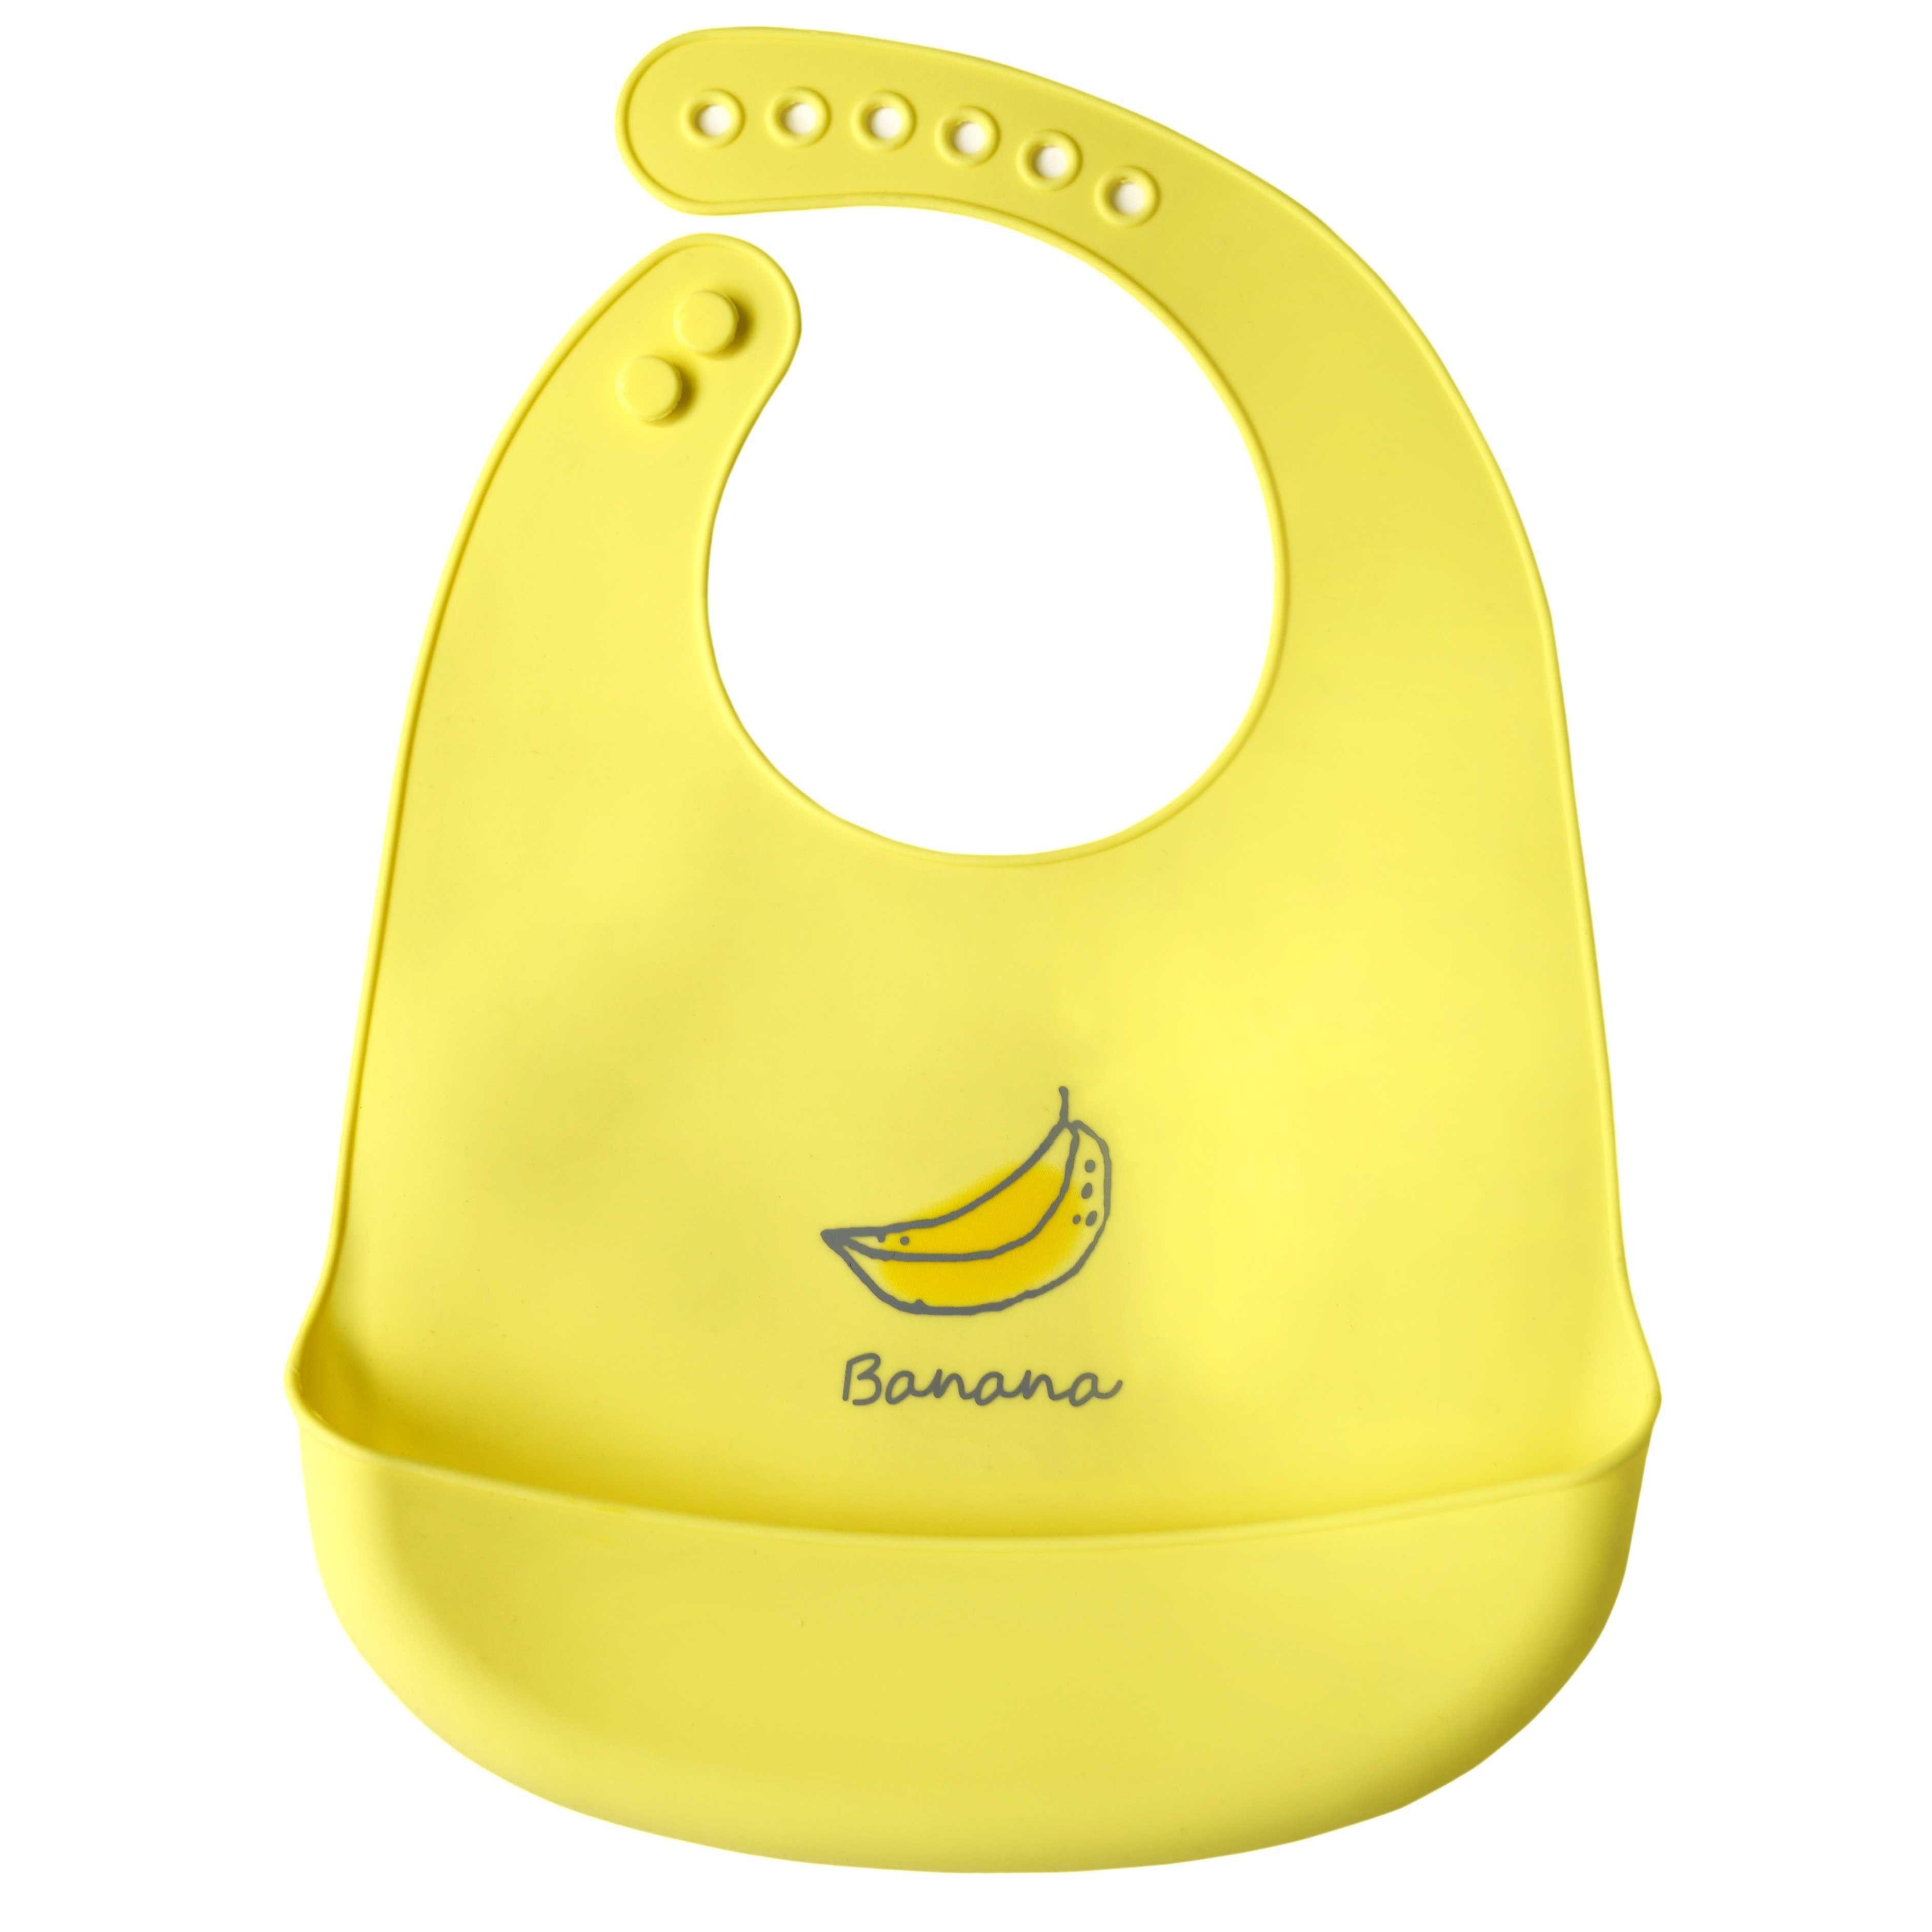 Silicone bib with a pocket for children - yellow, banana pattern